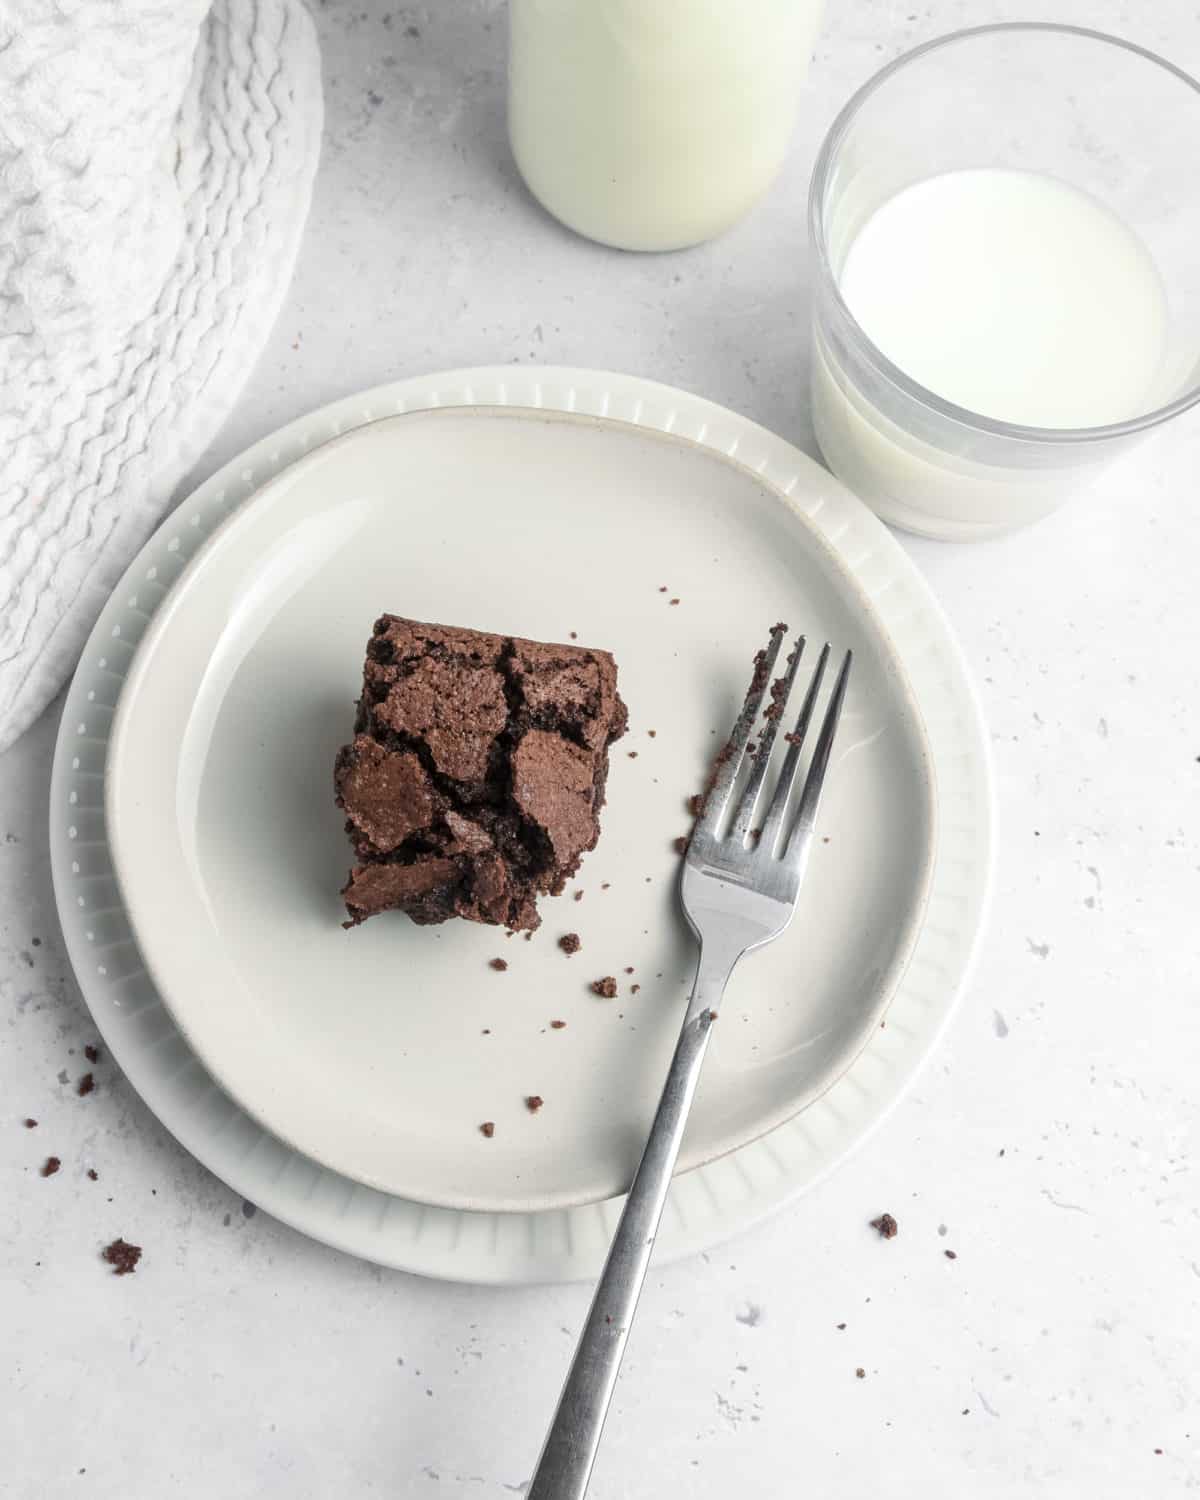 A brownie on a plate surrounded by crumbs and a glass of milk.